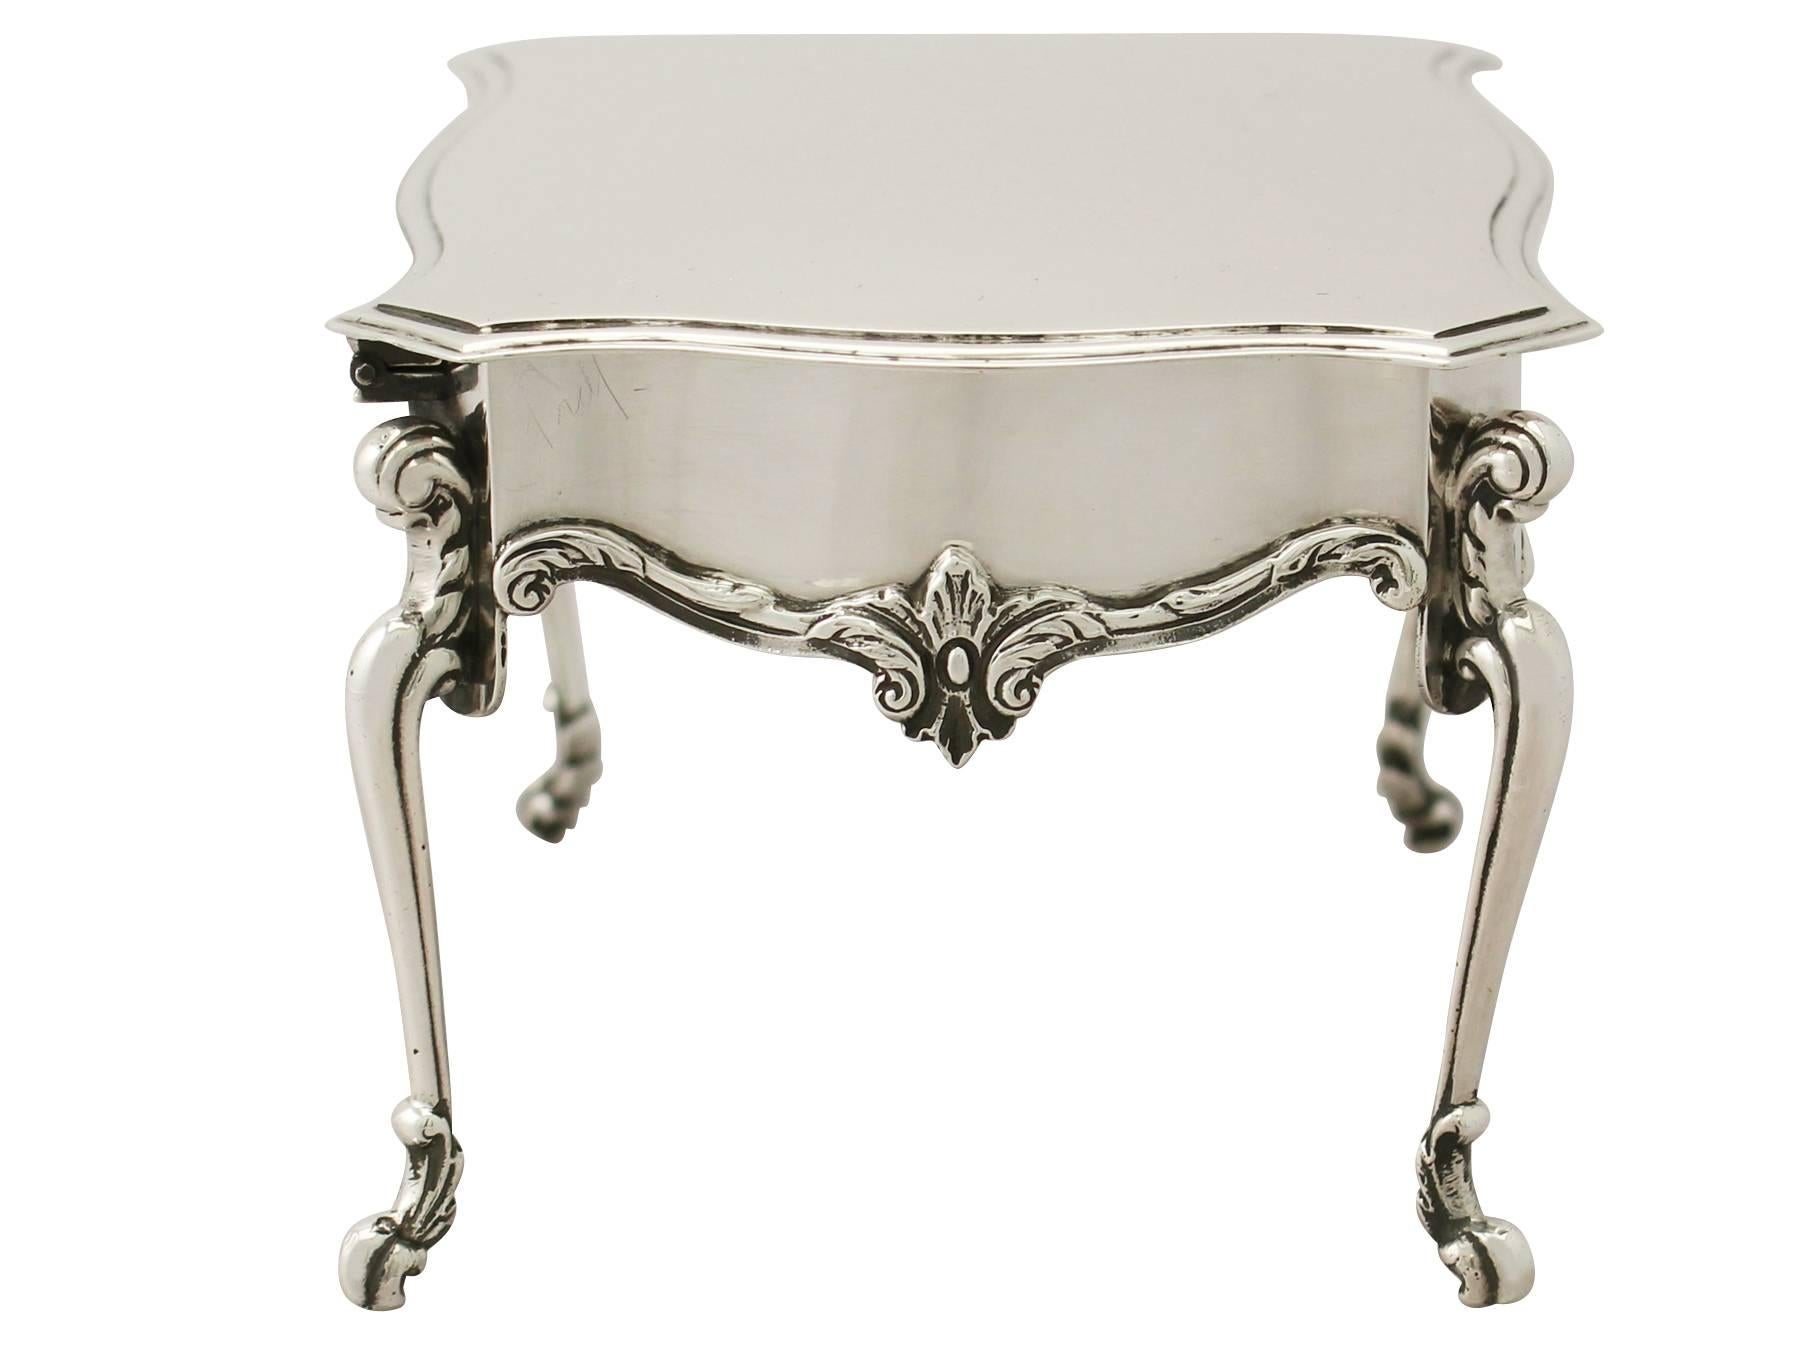 An exceptional, fine and impressive, unusual antique Edwardian English sterling silver jewelry box modeled in the form of an 18th century card table; an addition to our ornamental silverware collection.

This exceptional antique Edwardian sterling